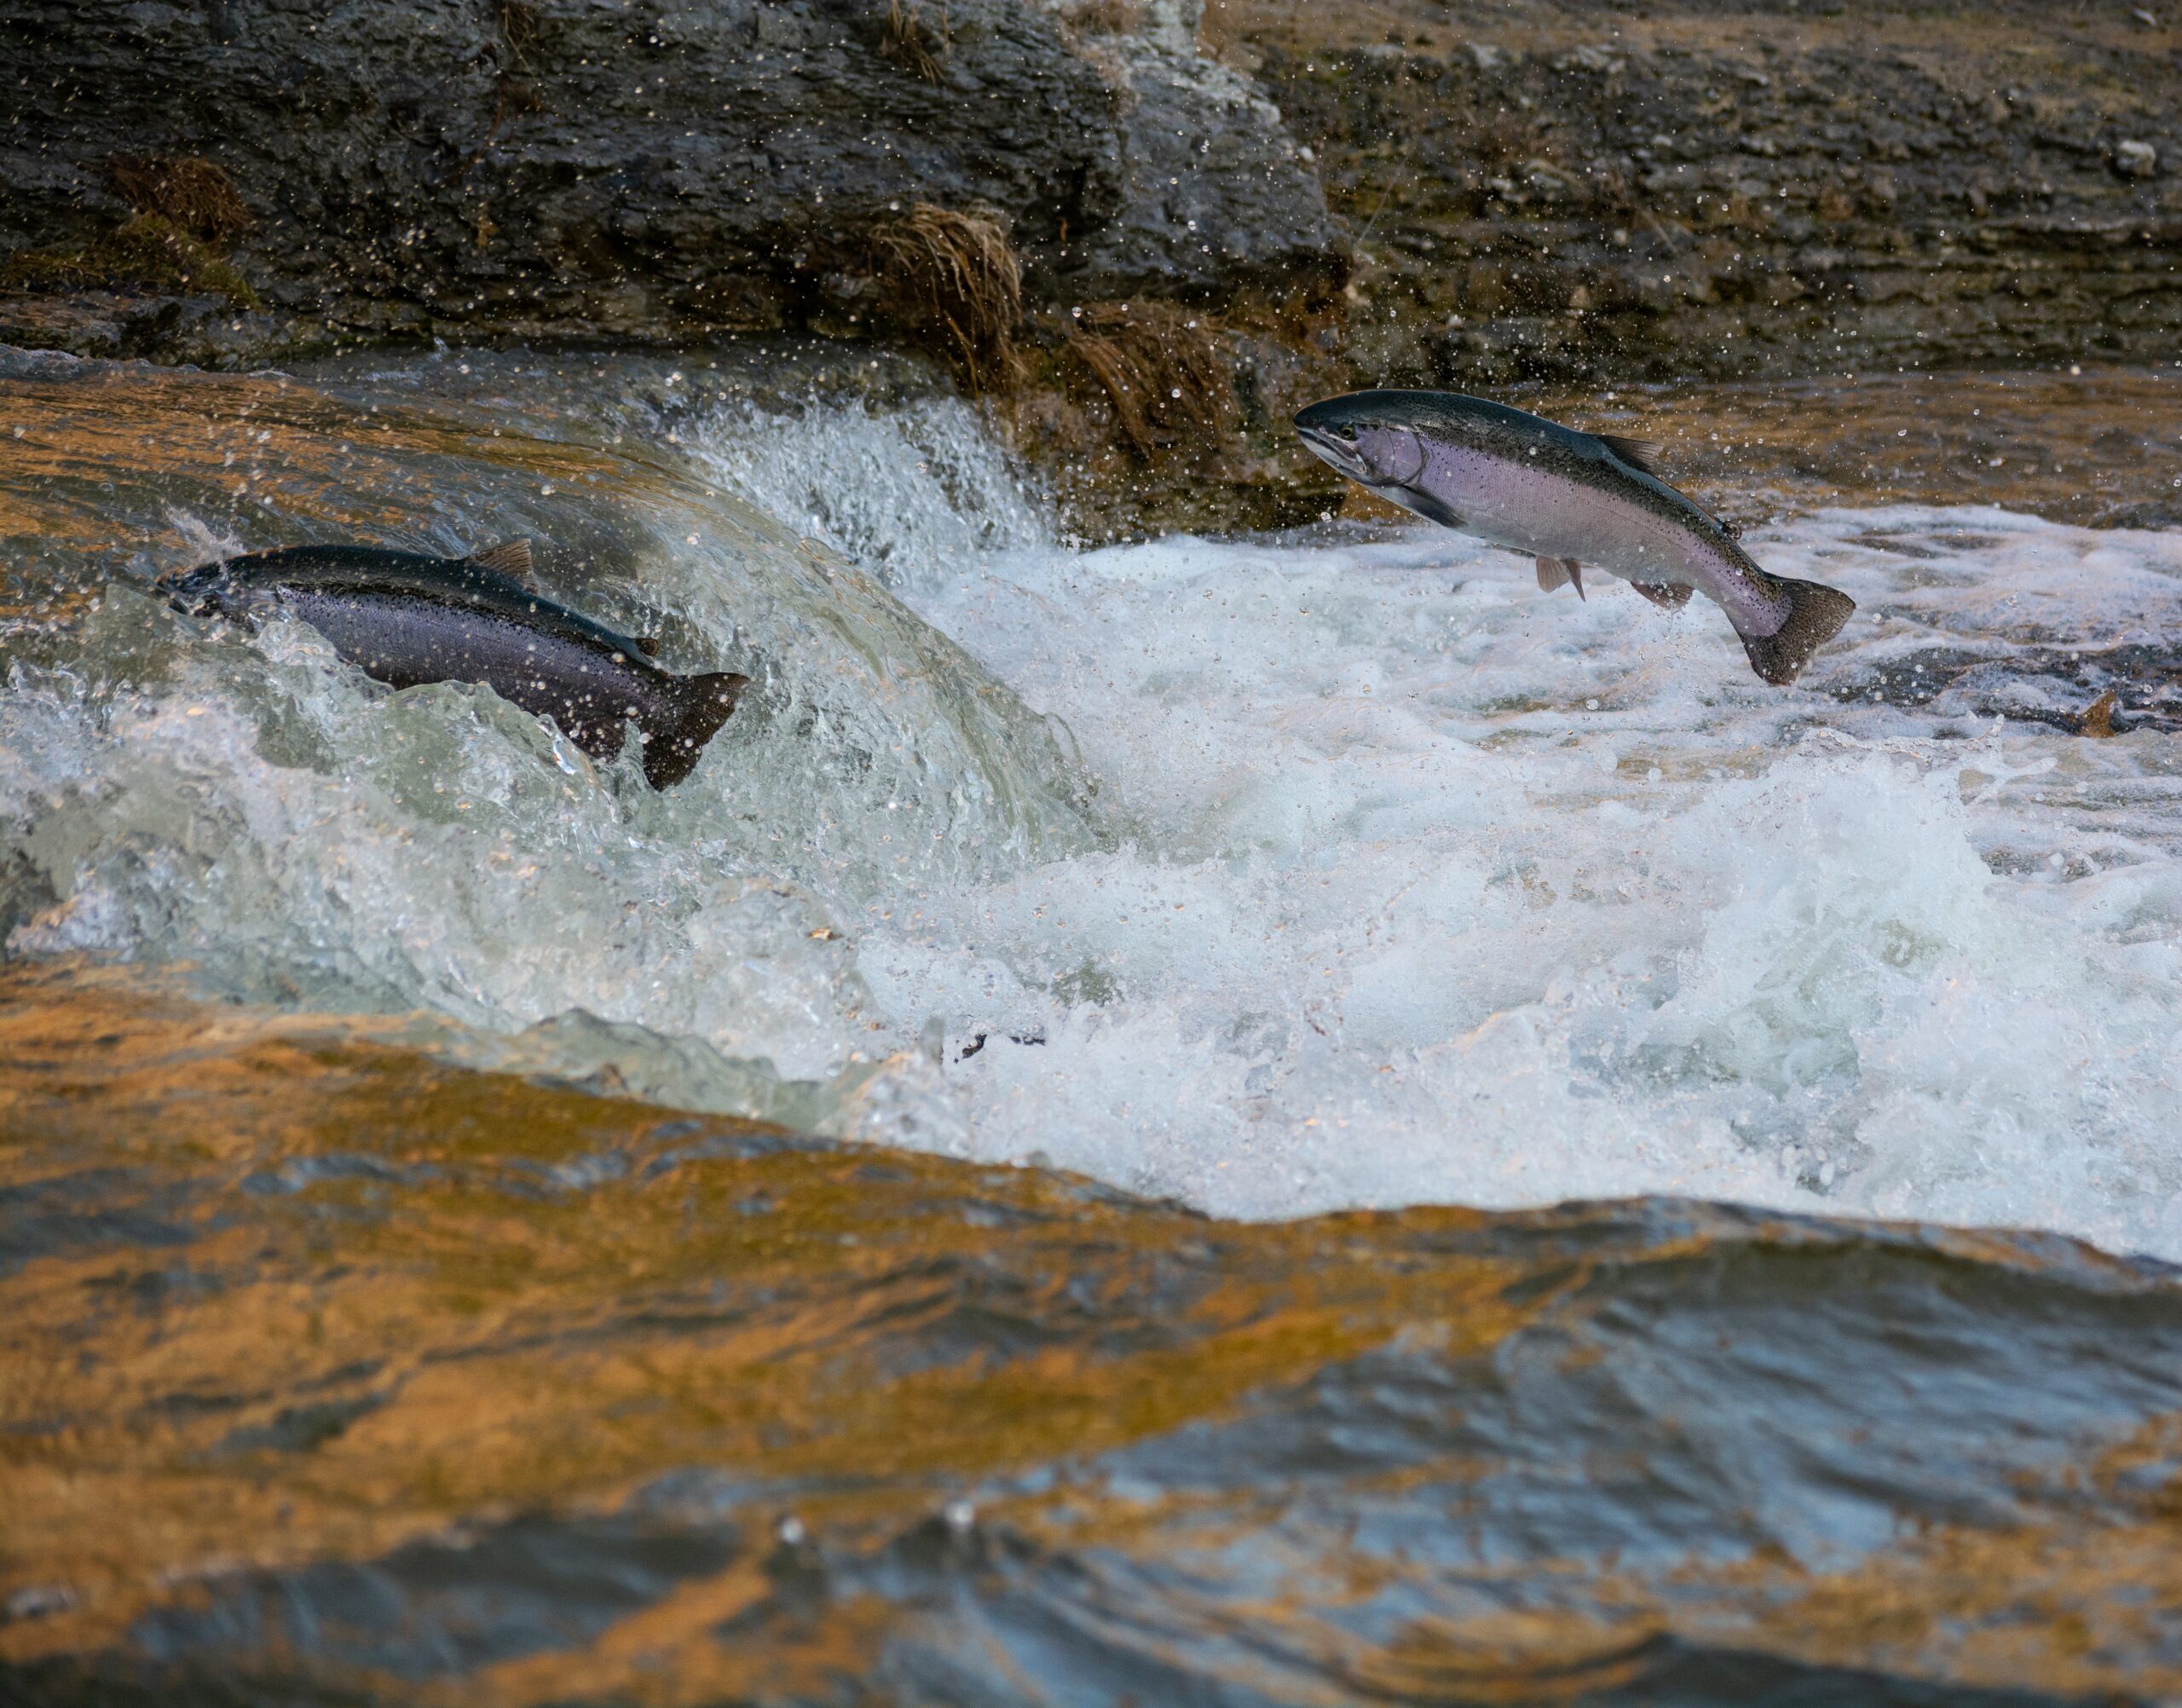 Salmon jumping over water